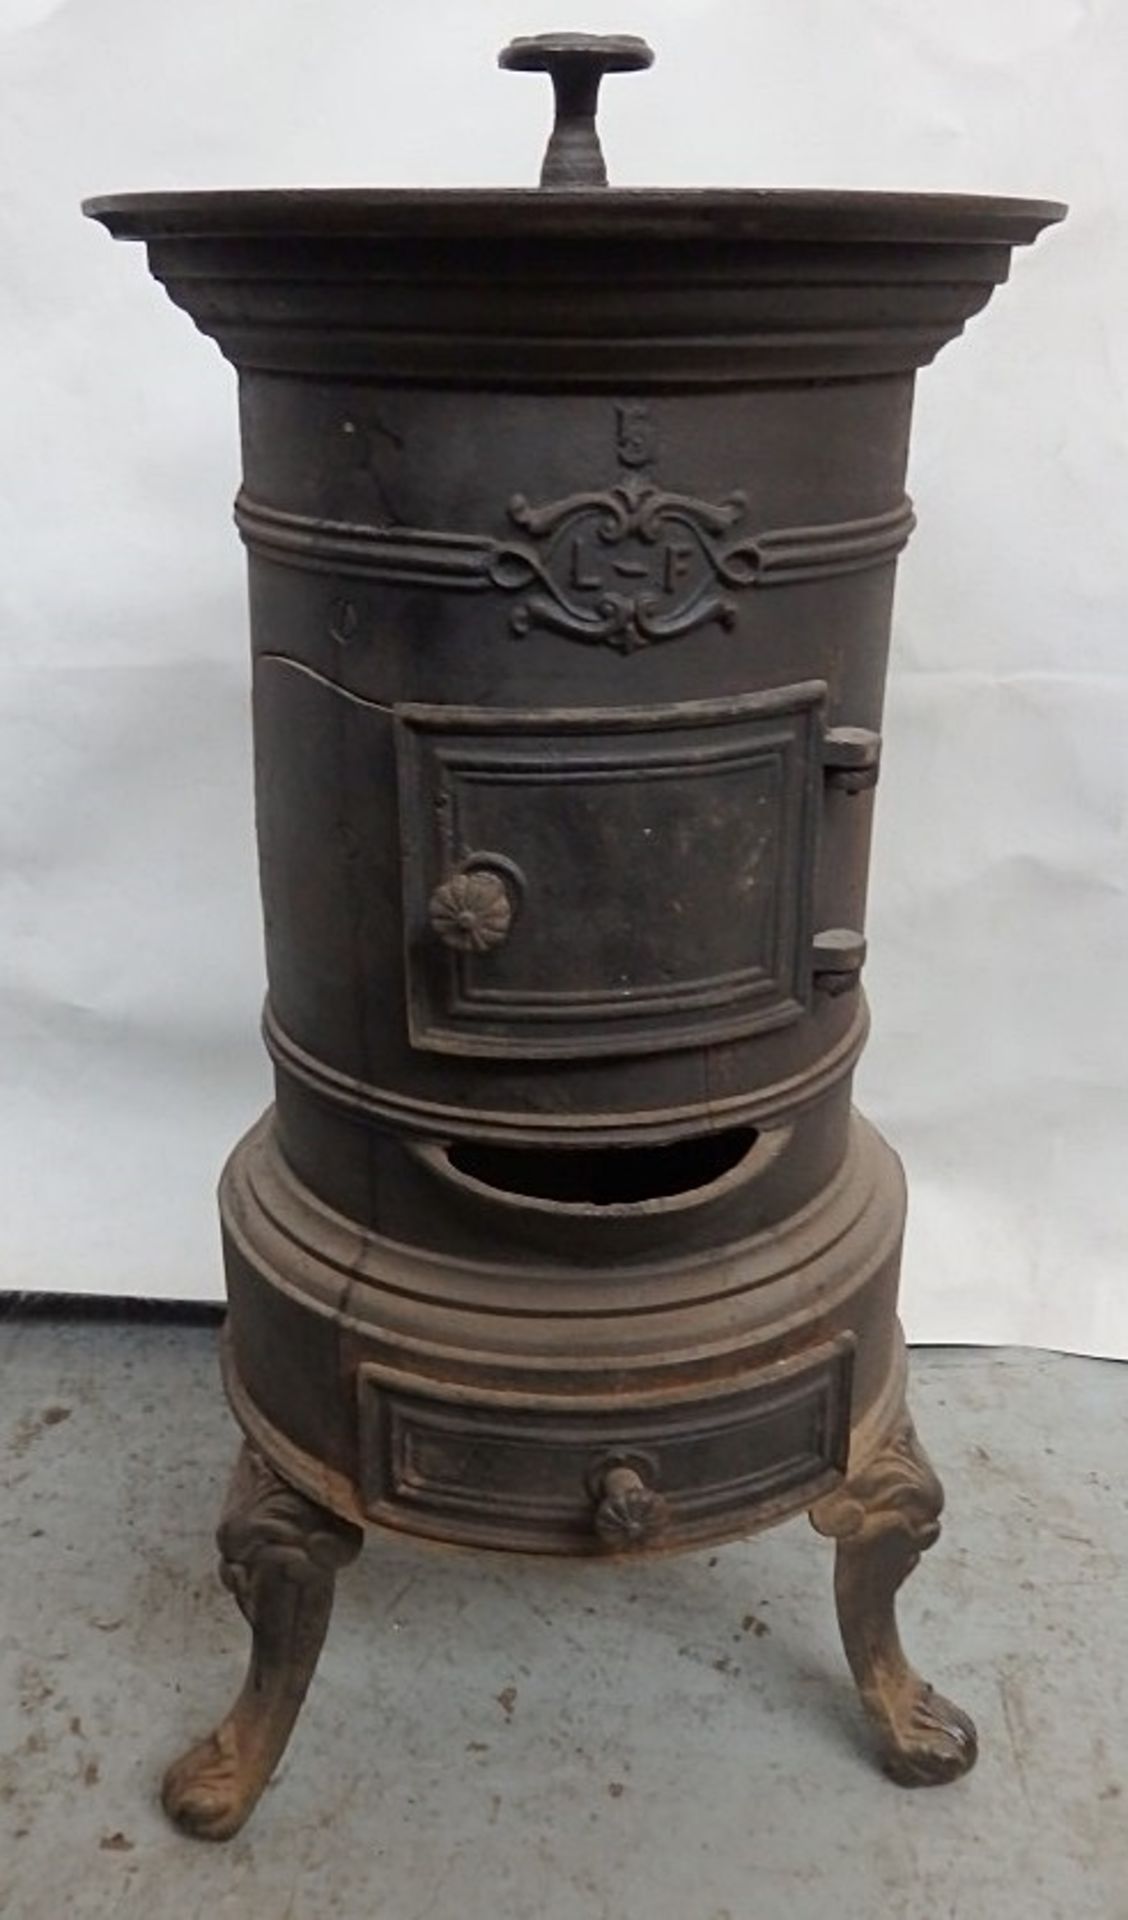 1 x Reclaimed Antique Cast Iron Potbelly Wood Burner / Stove - Dimensions: H61, Diameter 30cm - - Image 2 of 18